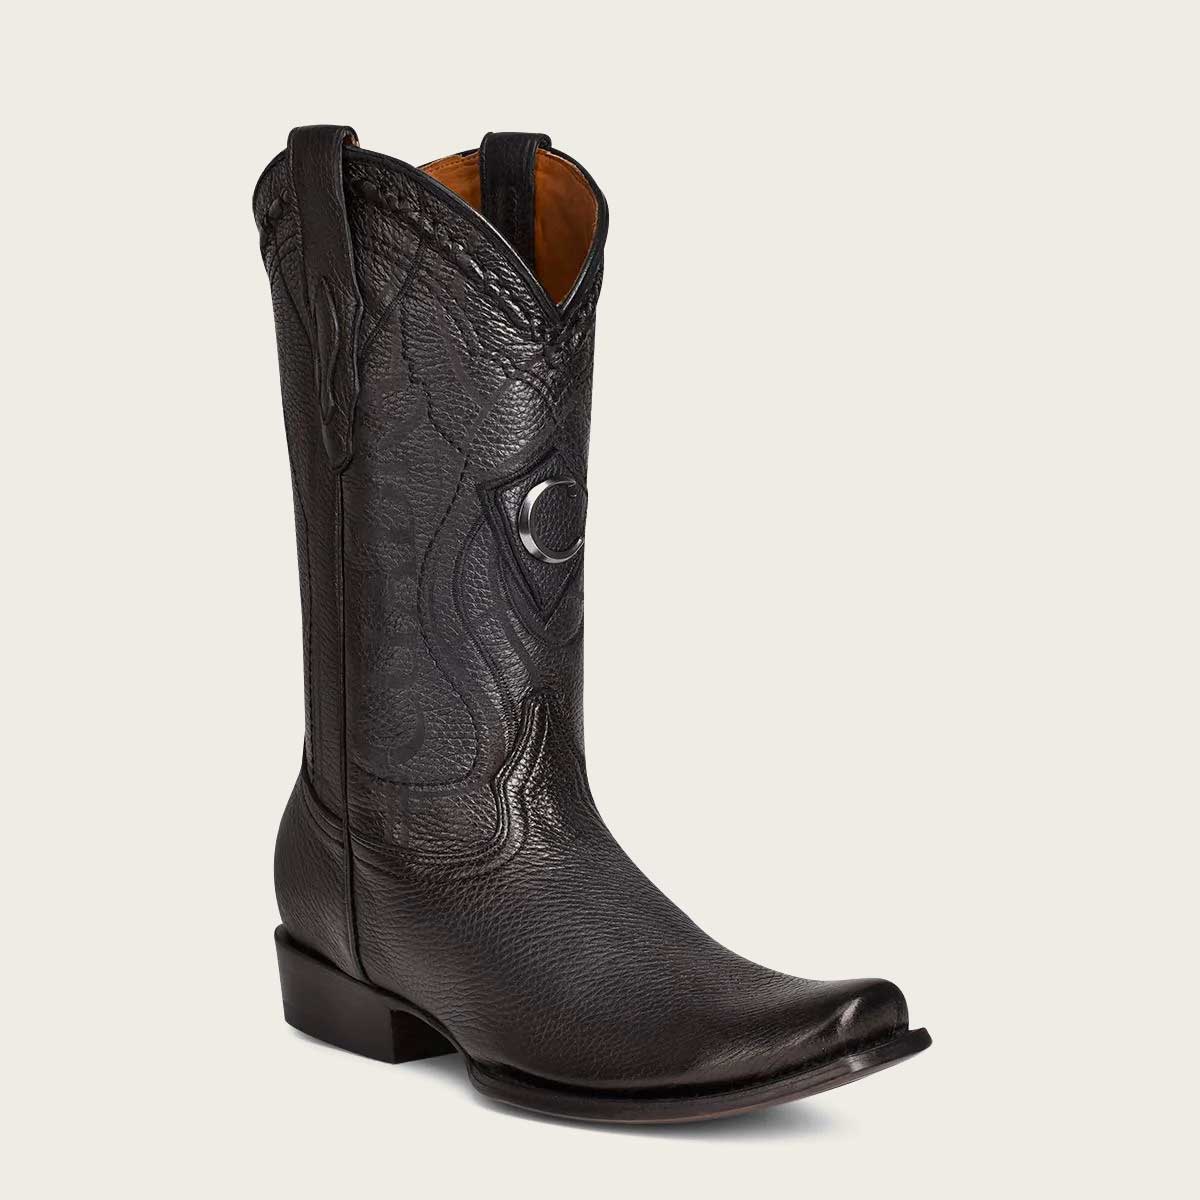 Step out in style with these men's cowboy boots made of genuine deerskin.